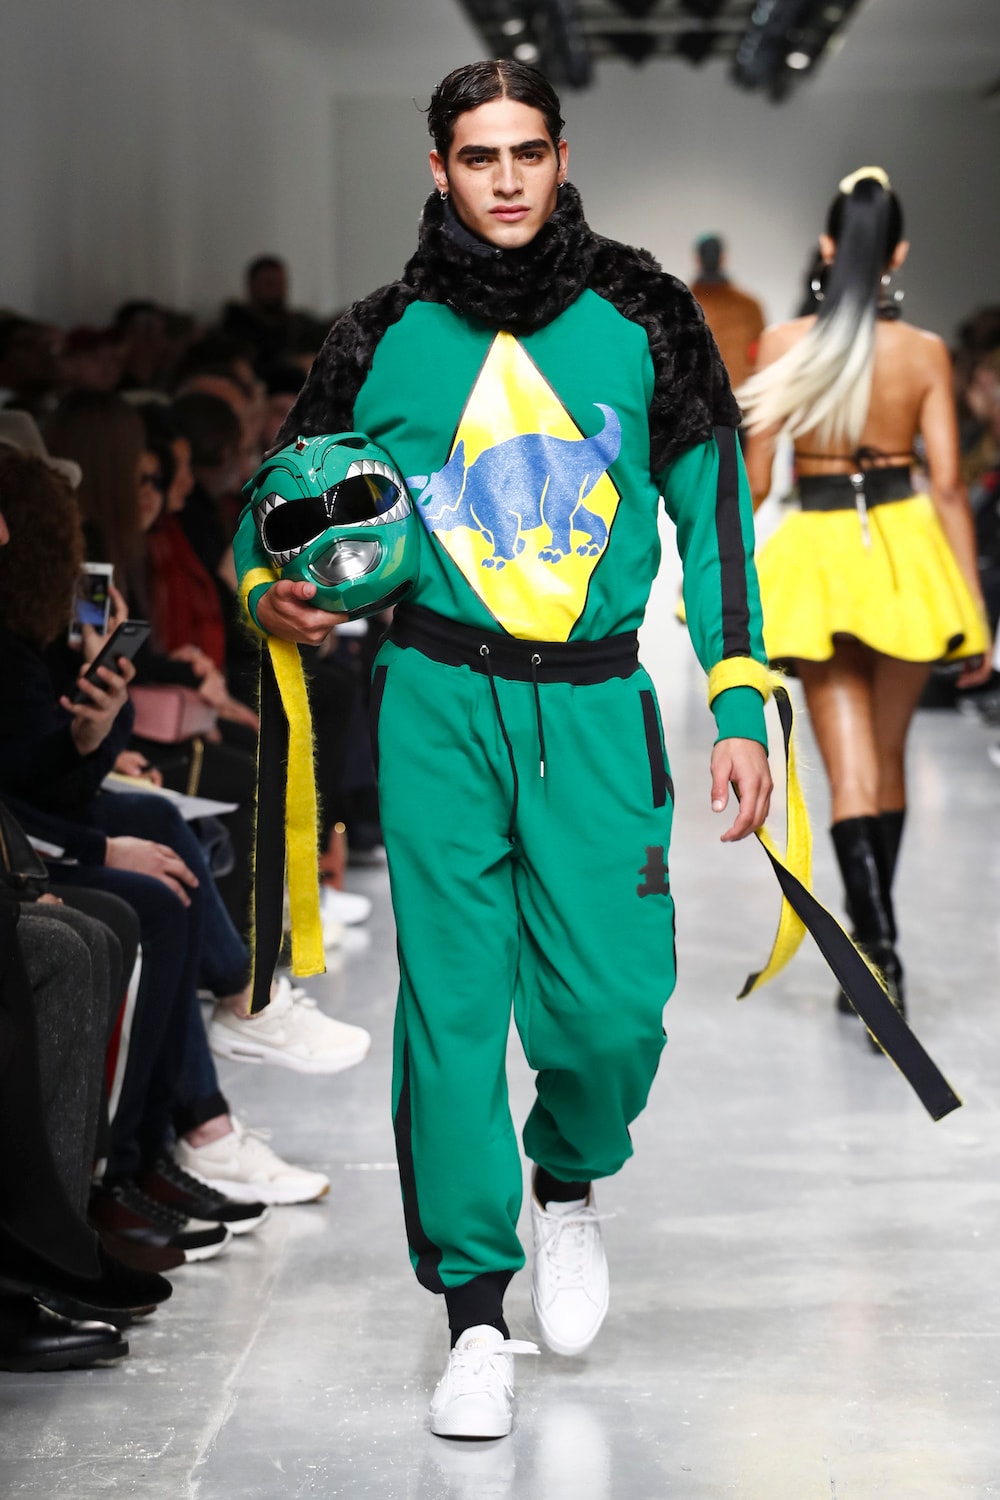 Bobby Abley Spotlights the Mighty Morphin Power Rangers for Its 2017 Fall/Winter Collection